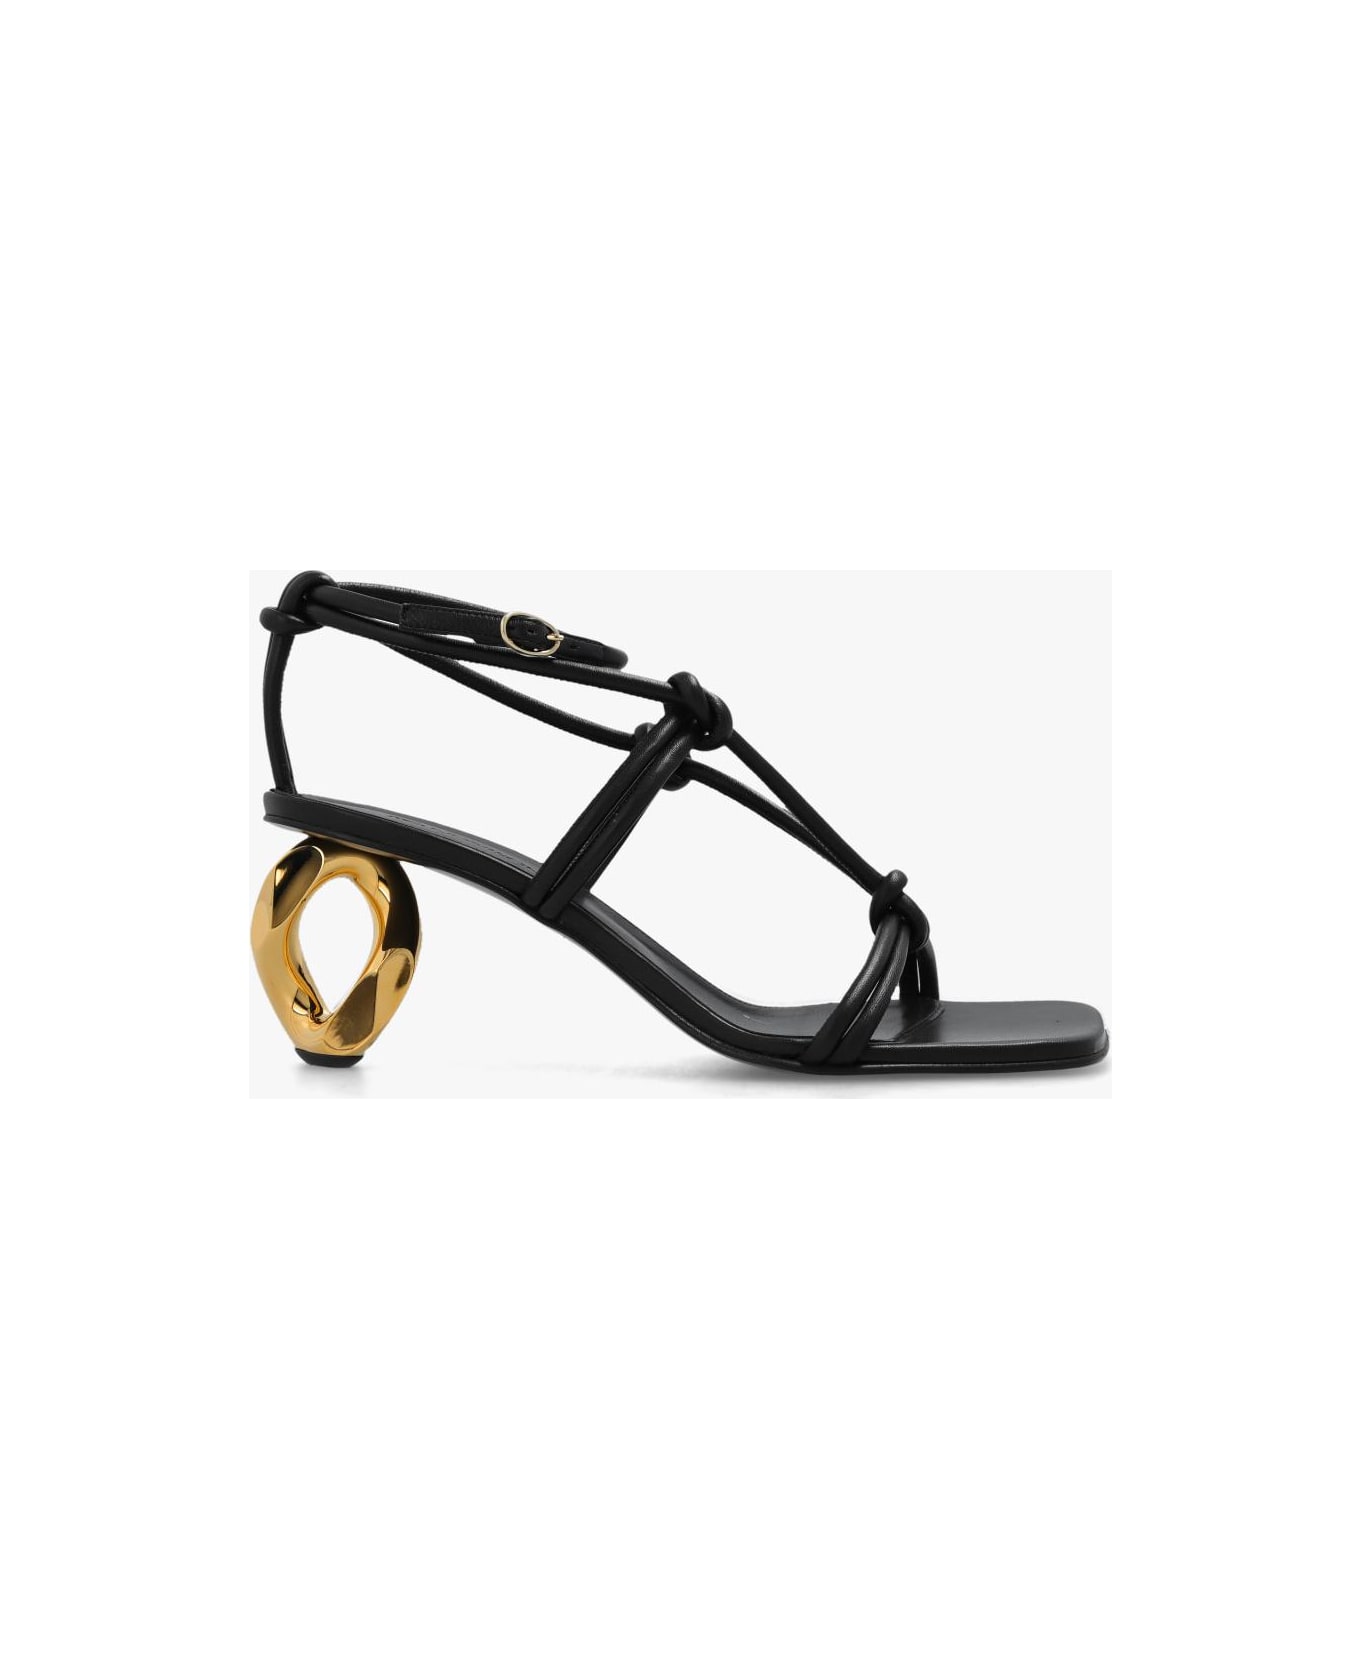 J.W. Anderson Leather Heeled Sandals - Black